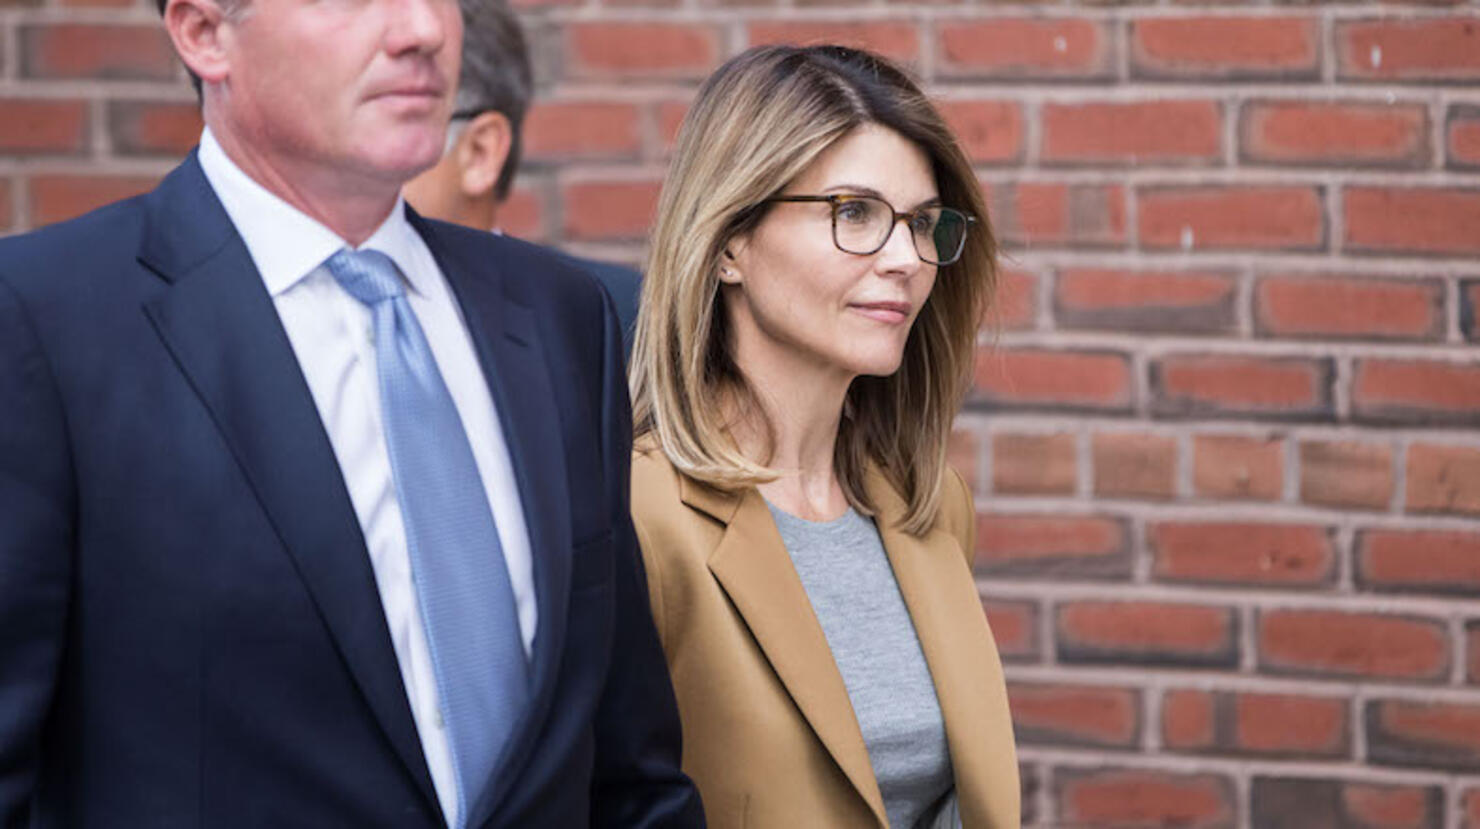 Celebrity Parents Felicity Huffman And Lori Loughlin Attend Court For Admissions Scandal